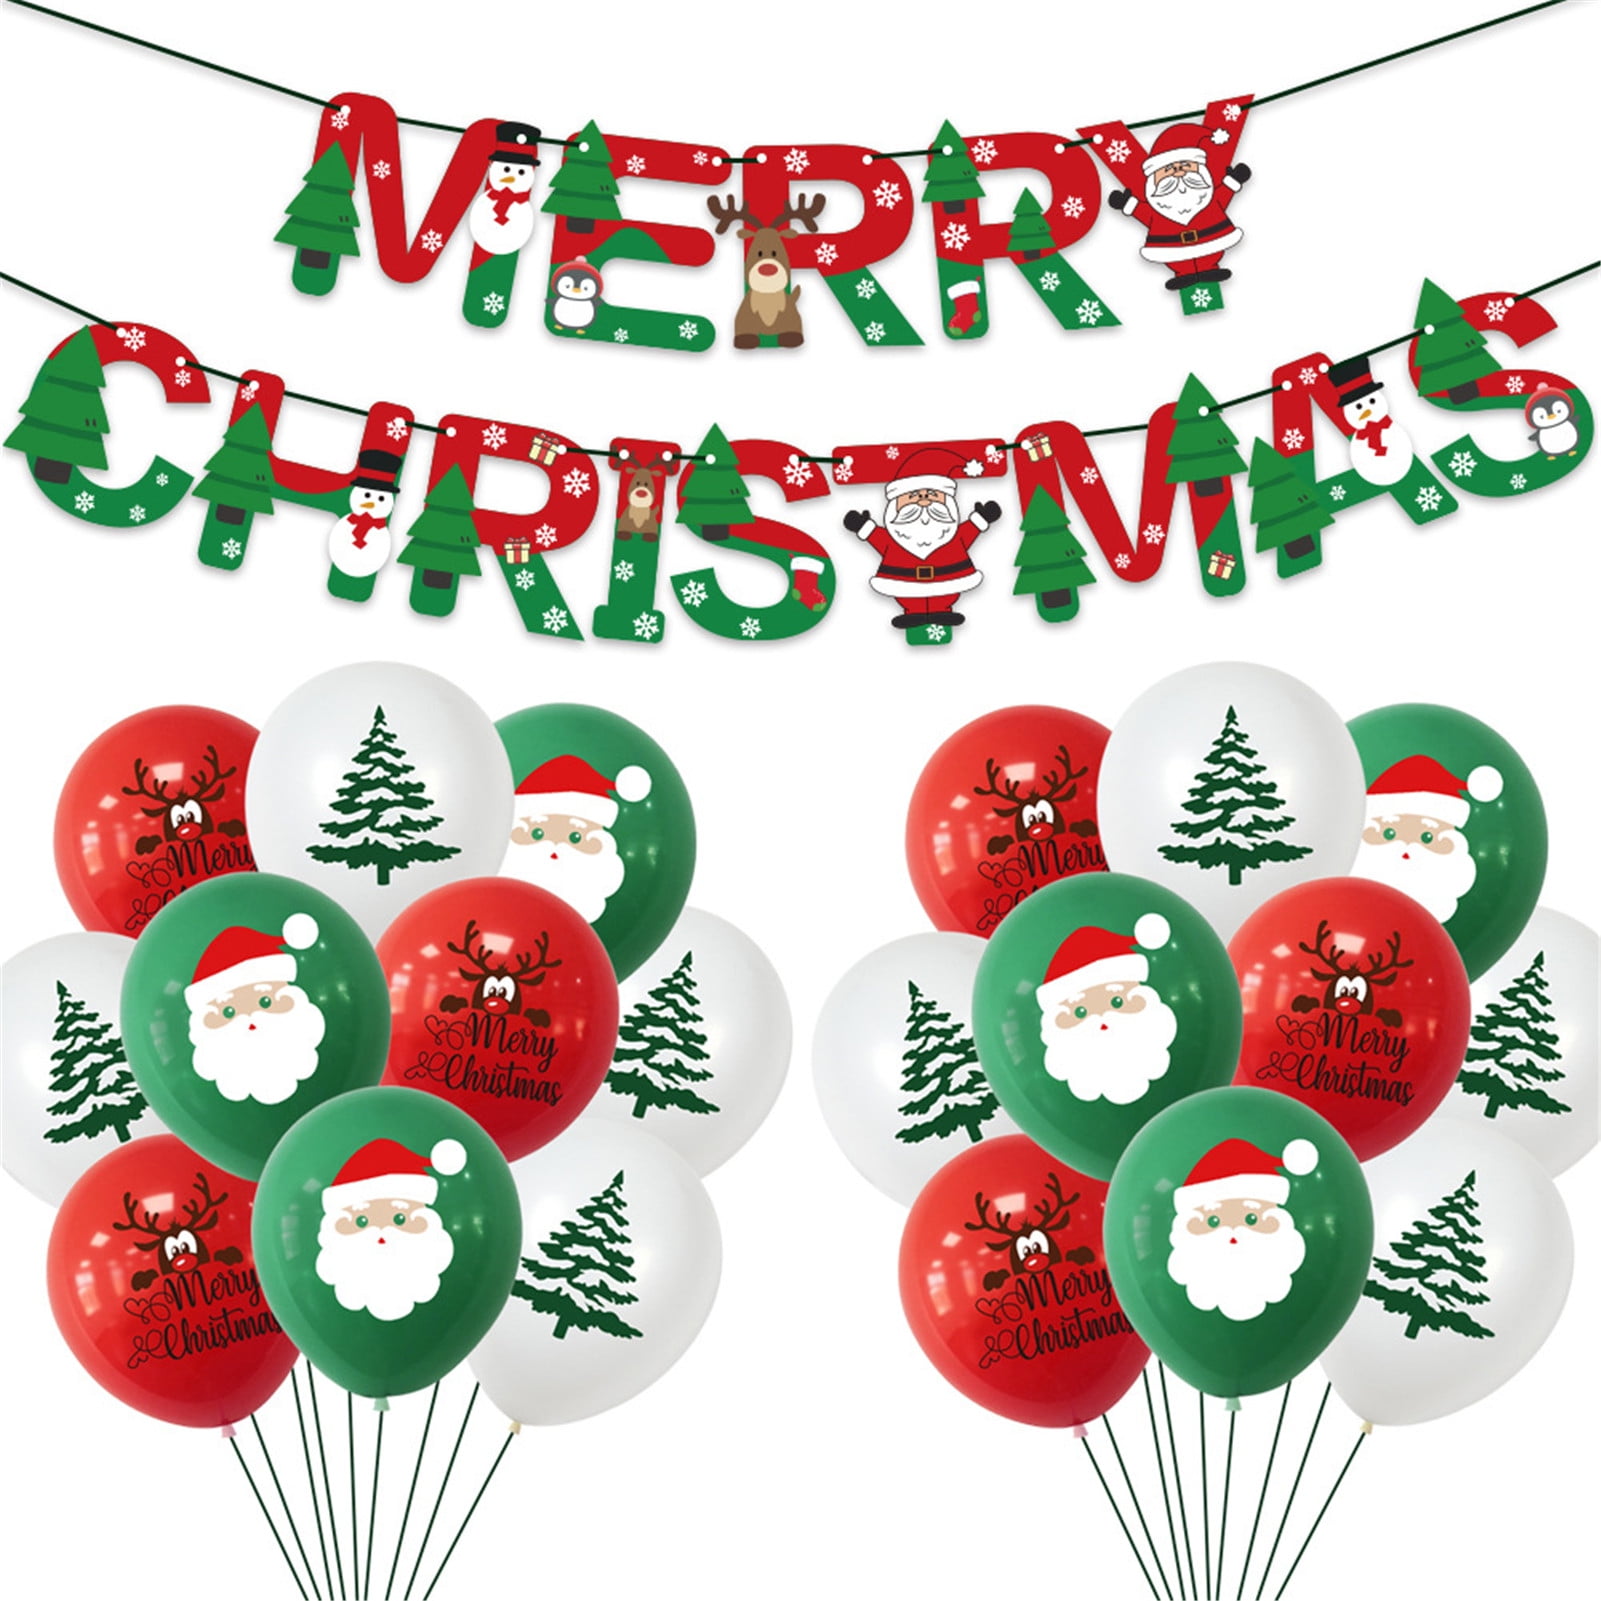 Details about   Merry Christmas Santa Banner Flag Wall Hanging Xmas Party Decoration Ornaments 